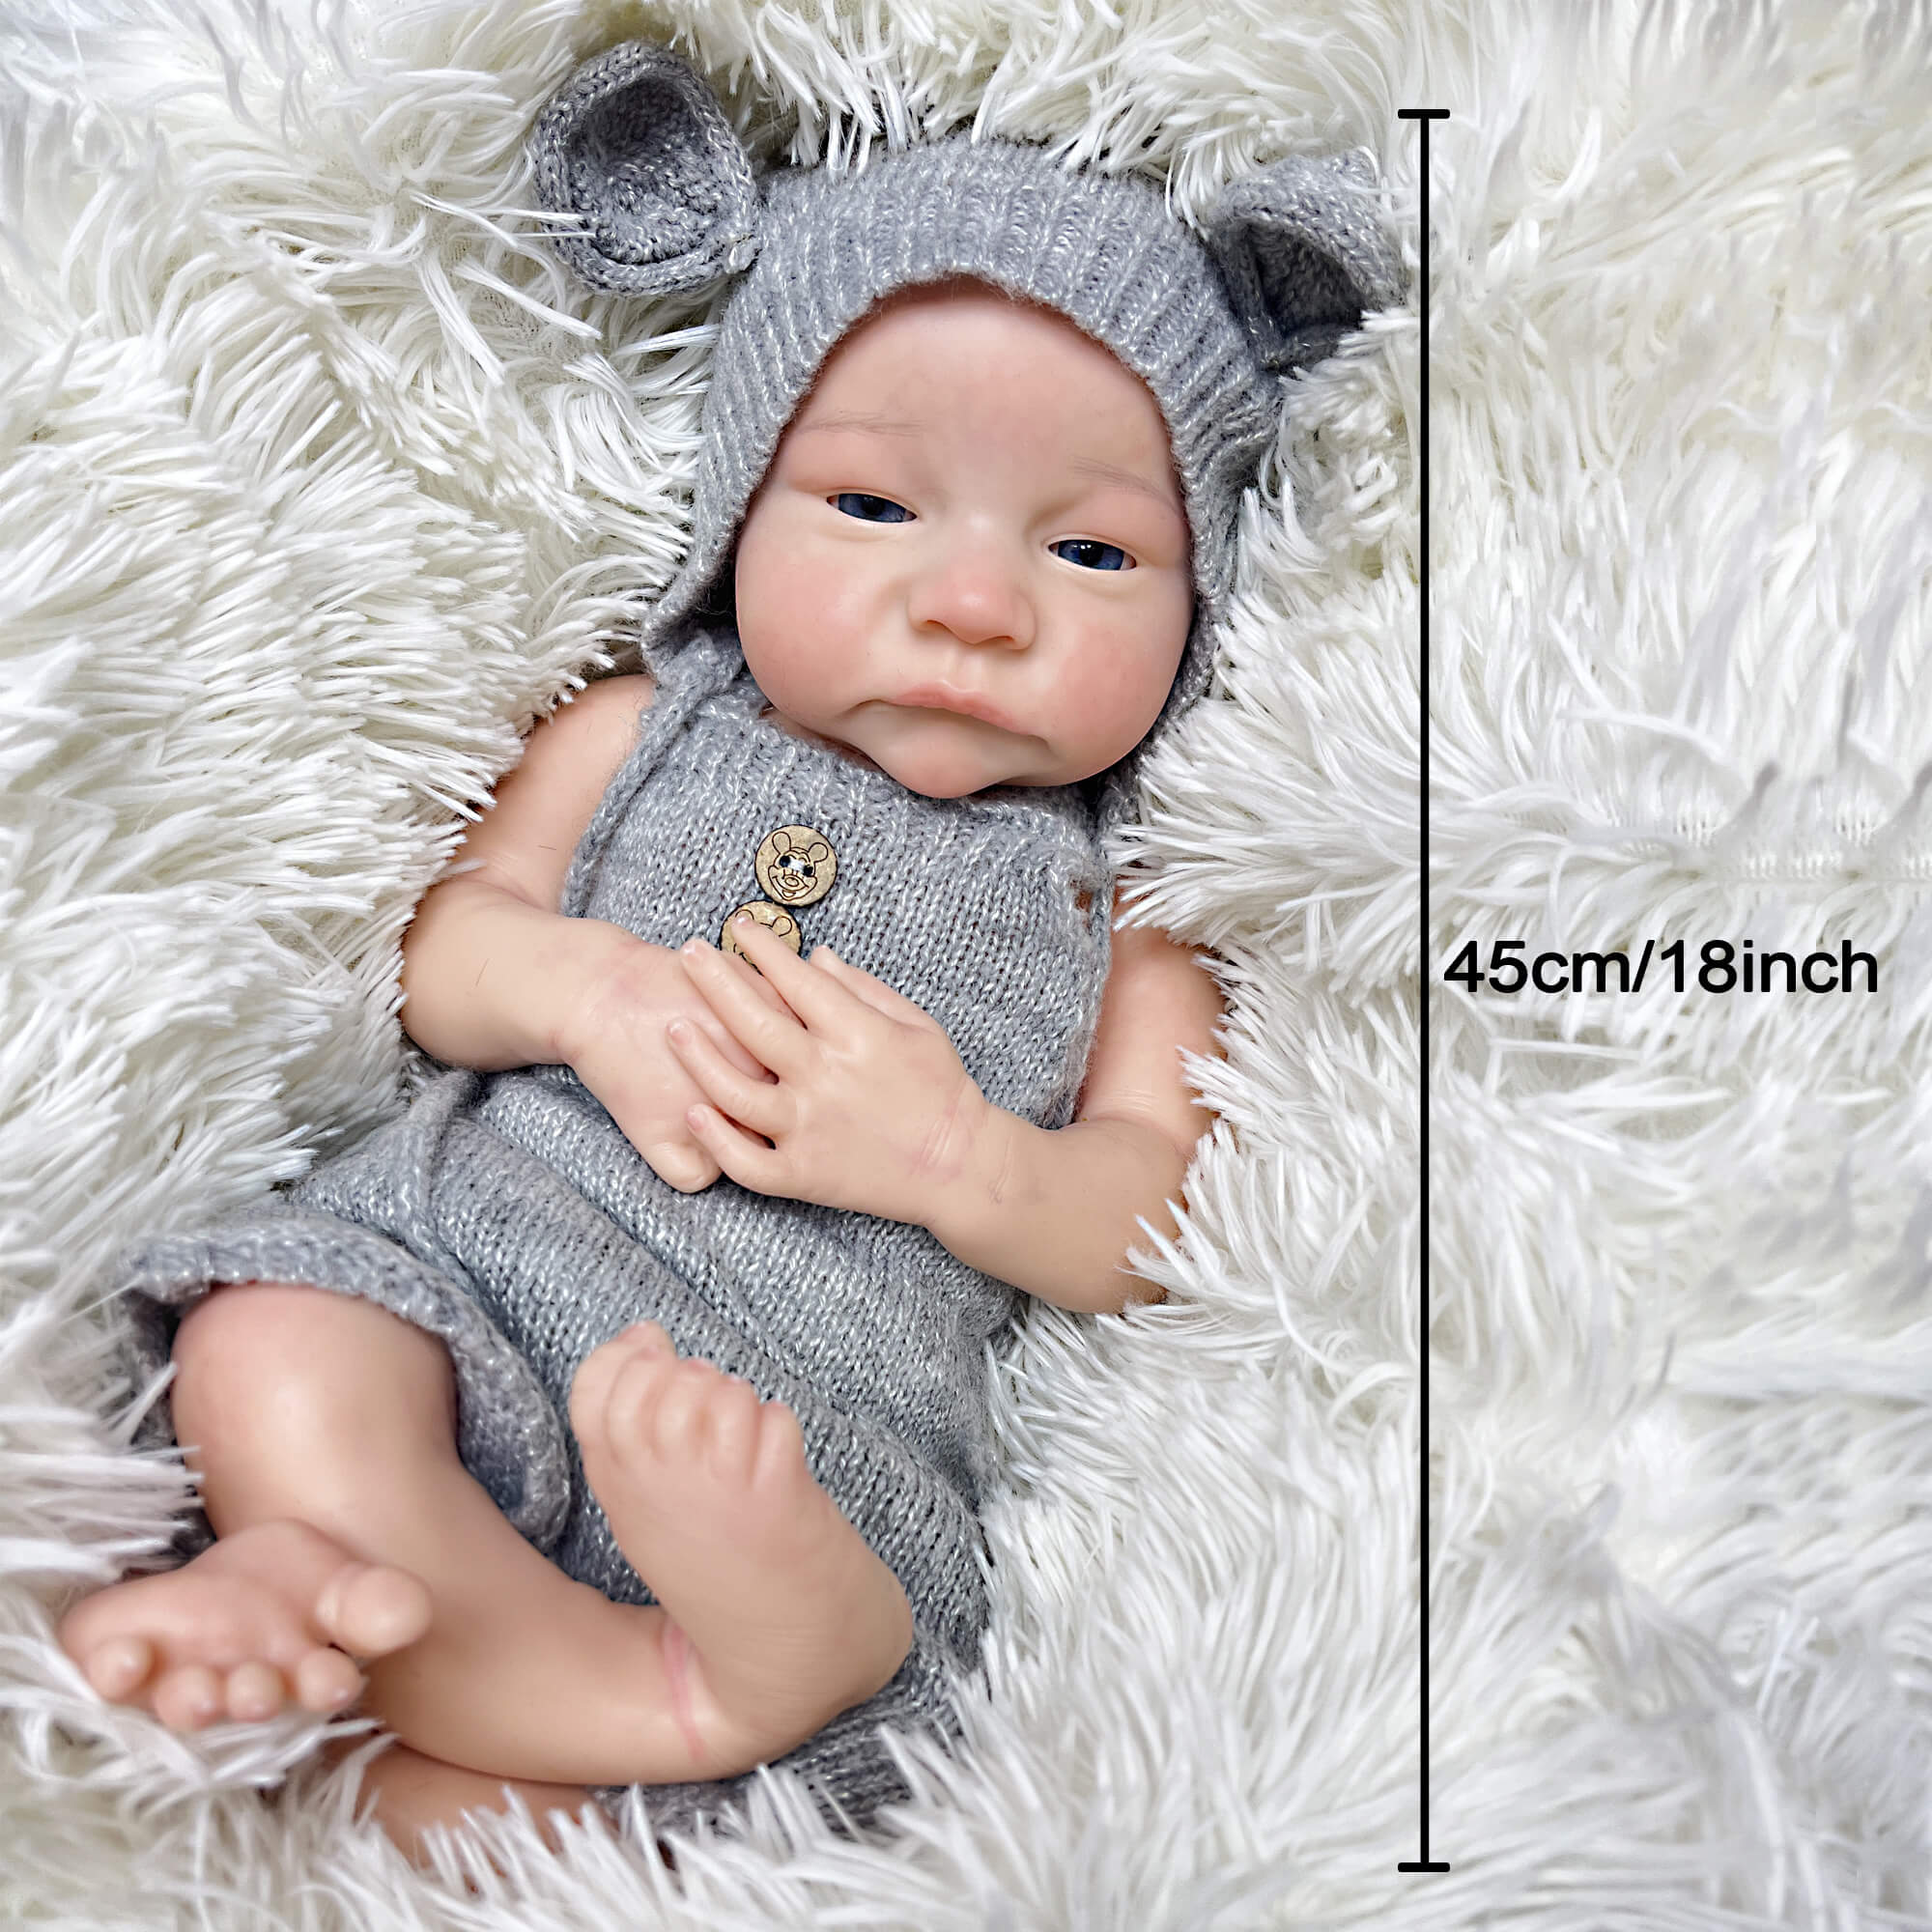 18-Inch Full Silicone Reborn Baby Doll - Realistic Lifelike Toy with Incredible Detail （Girl)